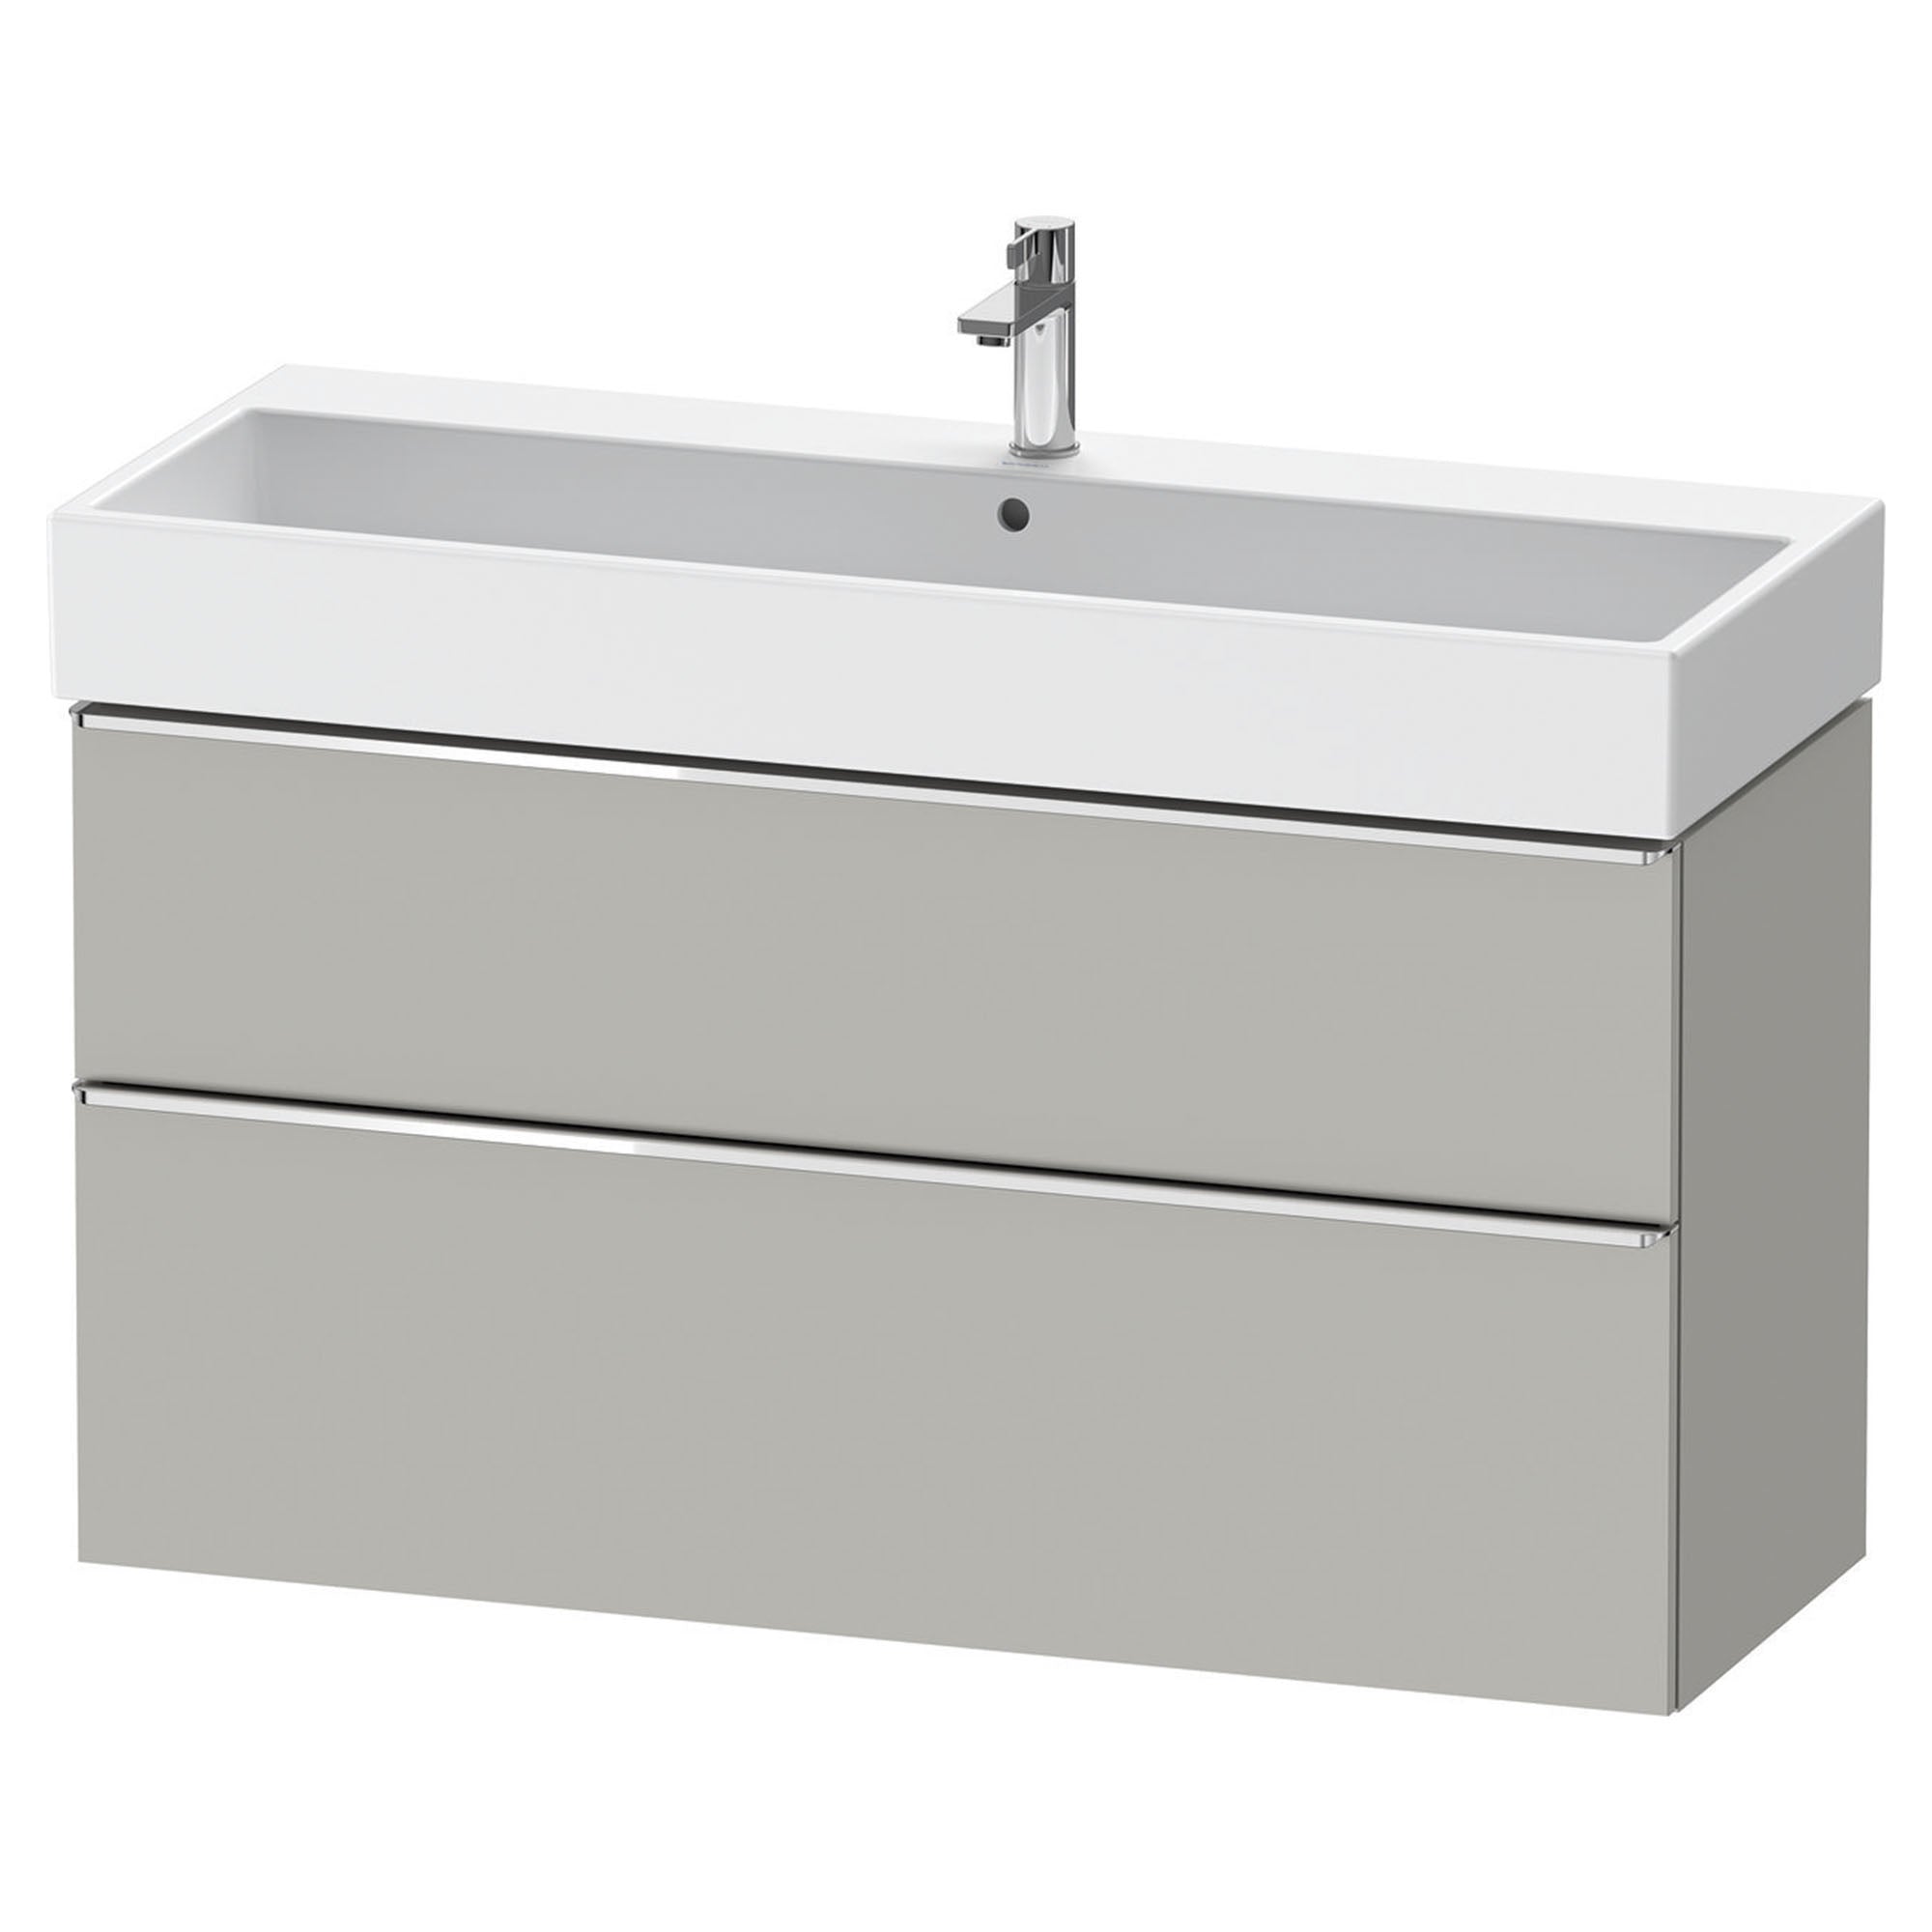 duravit d-neo 1200 wall mounted vanity-unit with vero basin concrete grey chrome handles